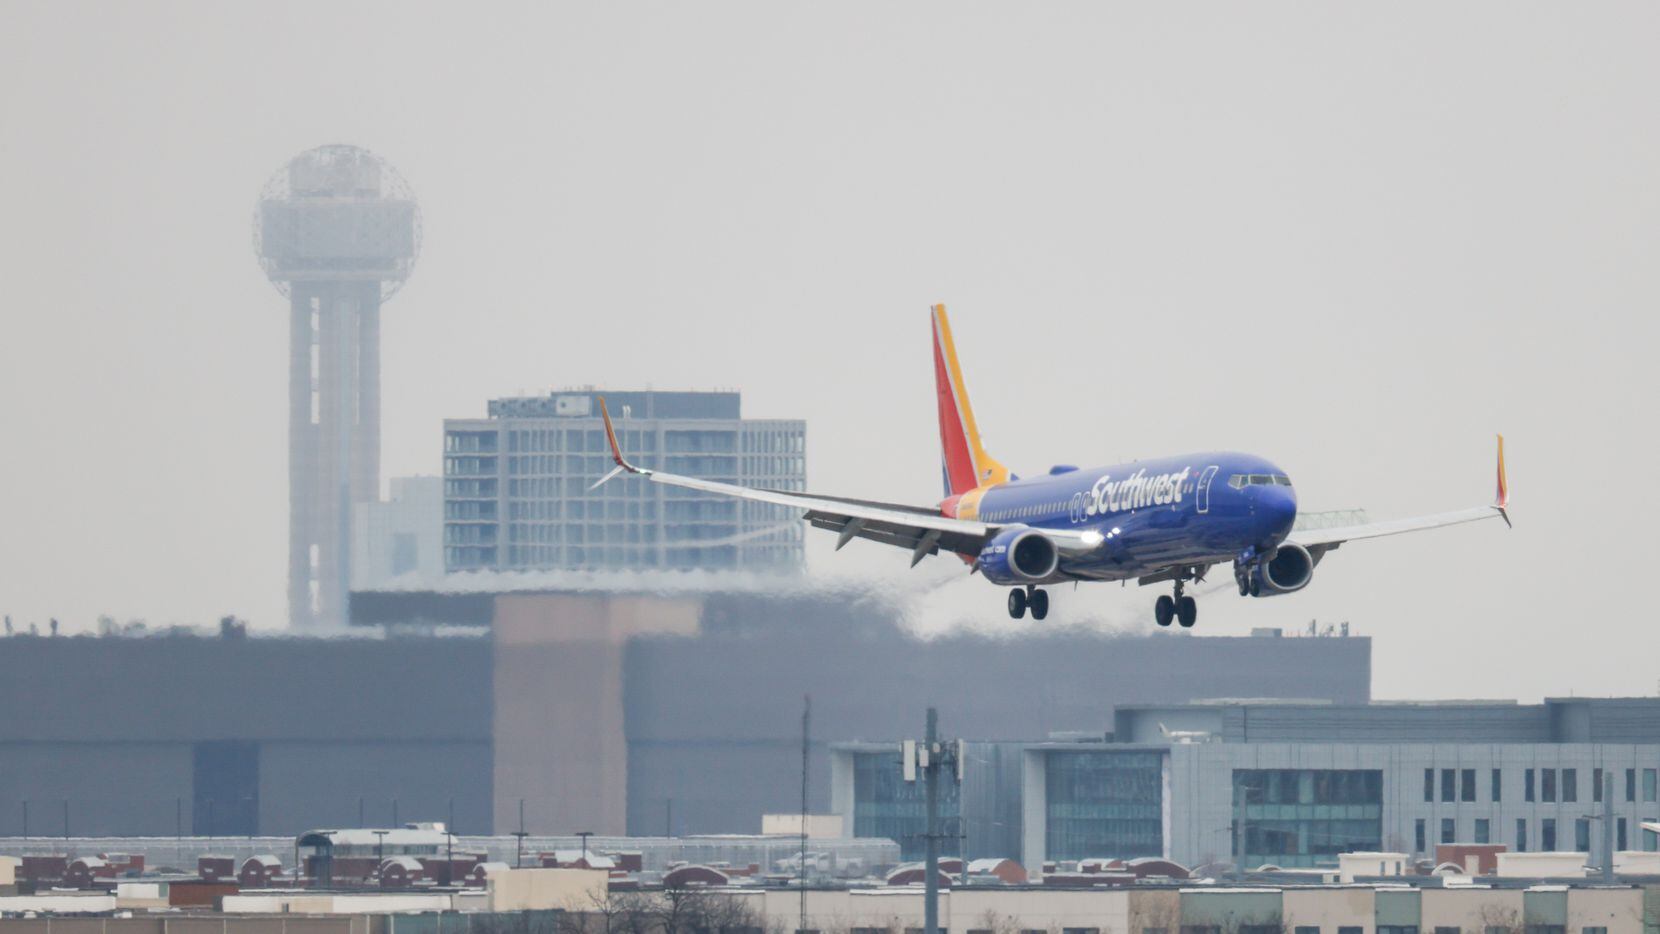 A Southwest flight arrives at the Dallas Love Field in Dallas on Monday, Jan. 30, 2023.